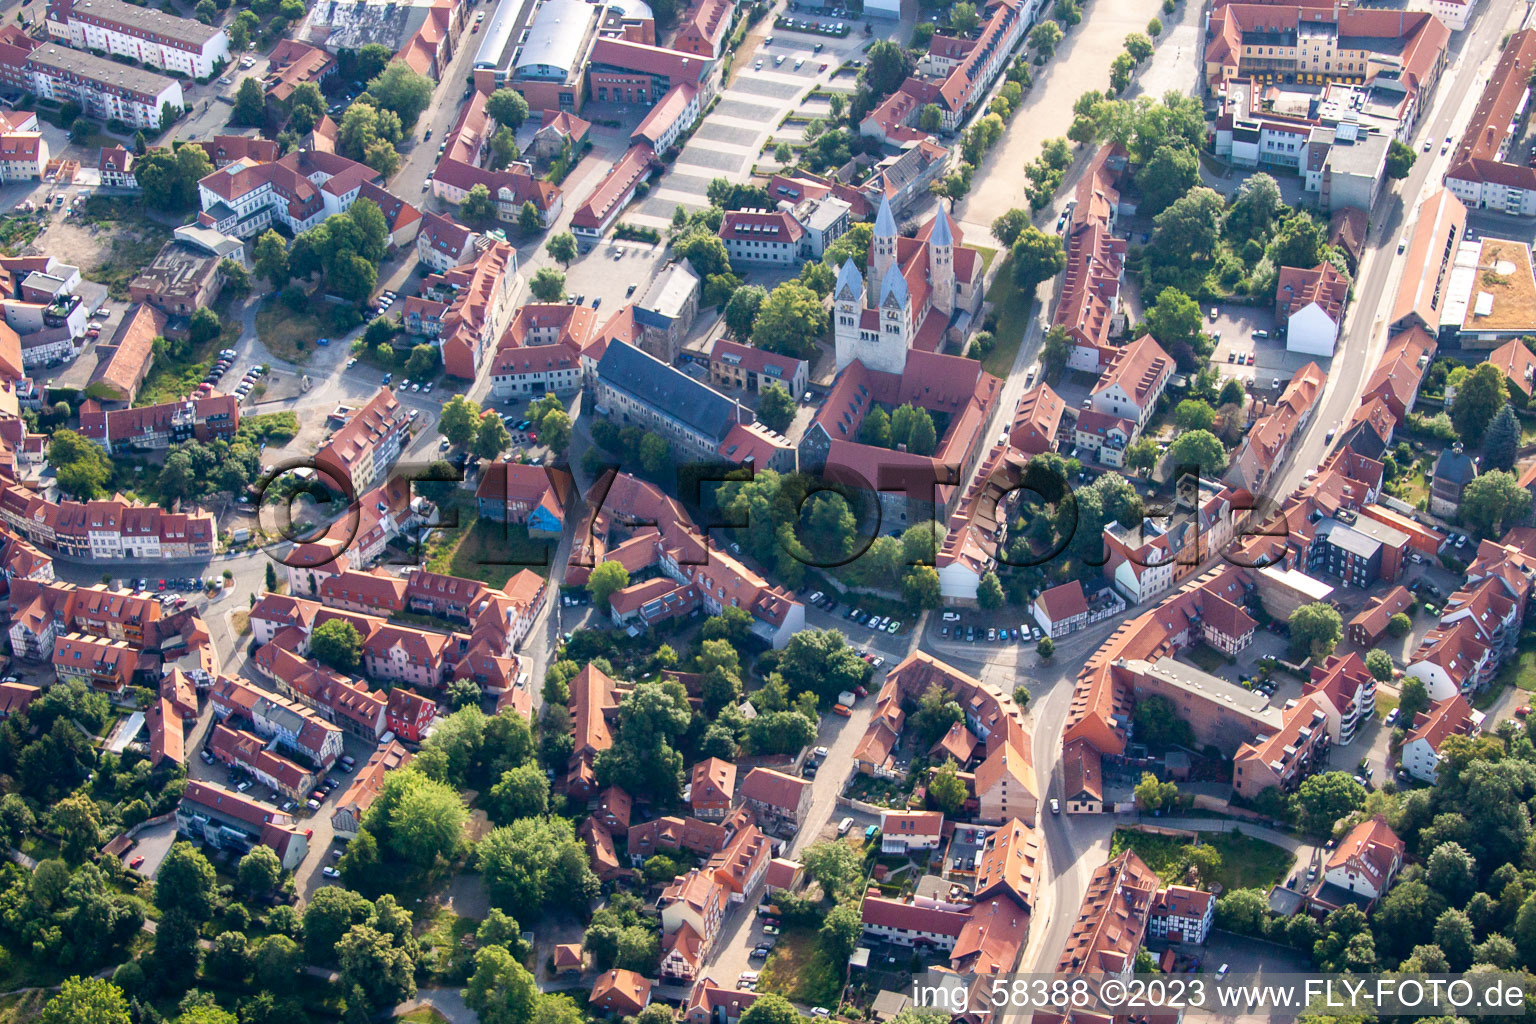 Aerial photograpy of Church of Our Lady in Halberstadt in the state Saxony-Anhalt, Germany